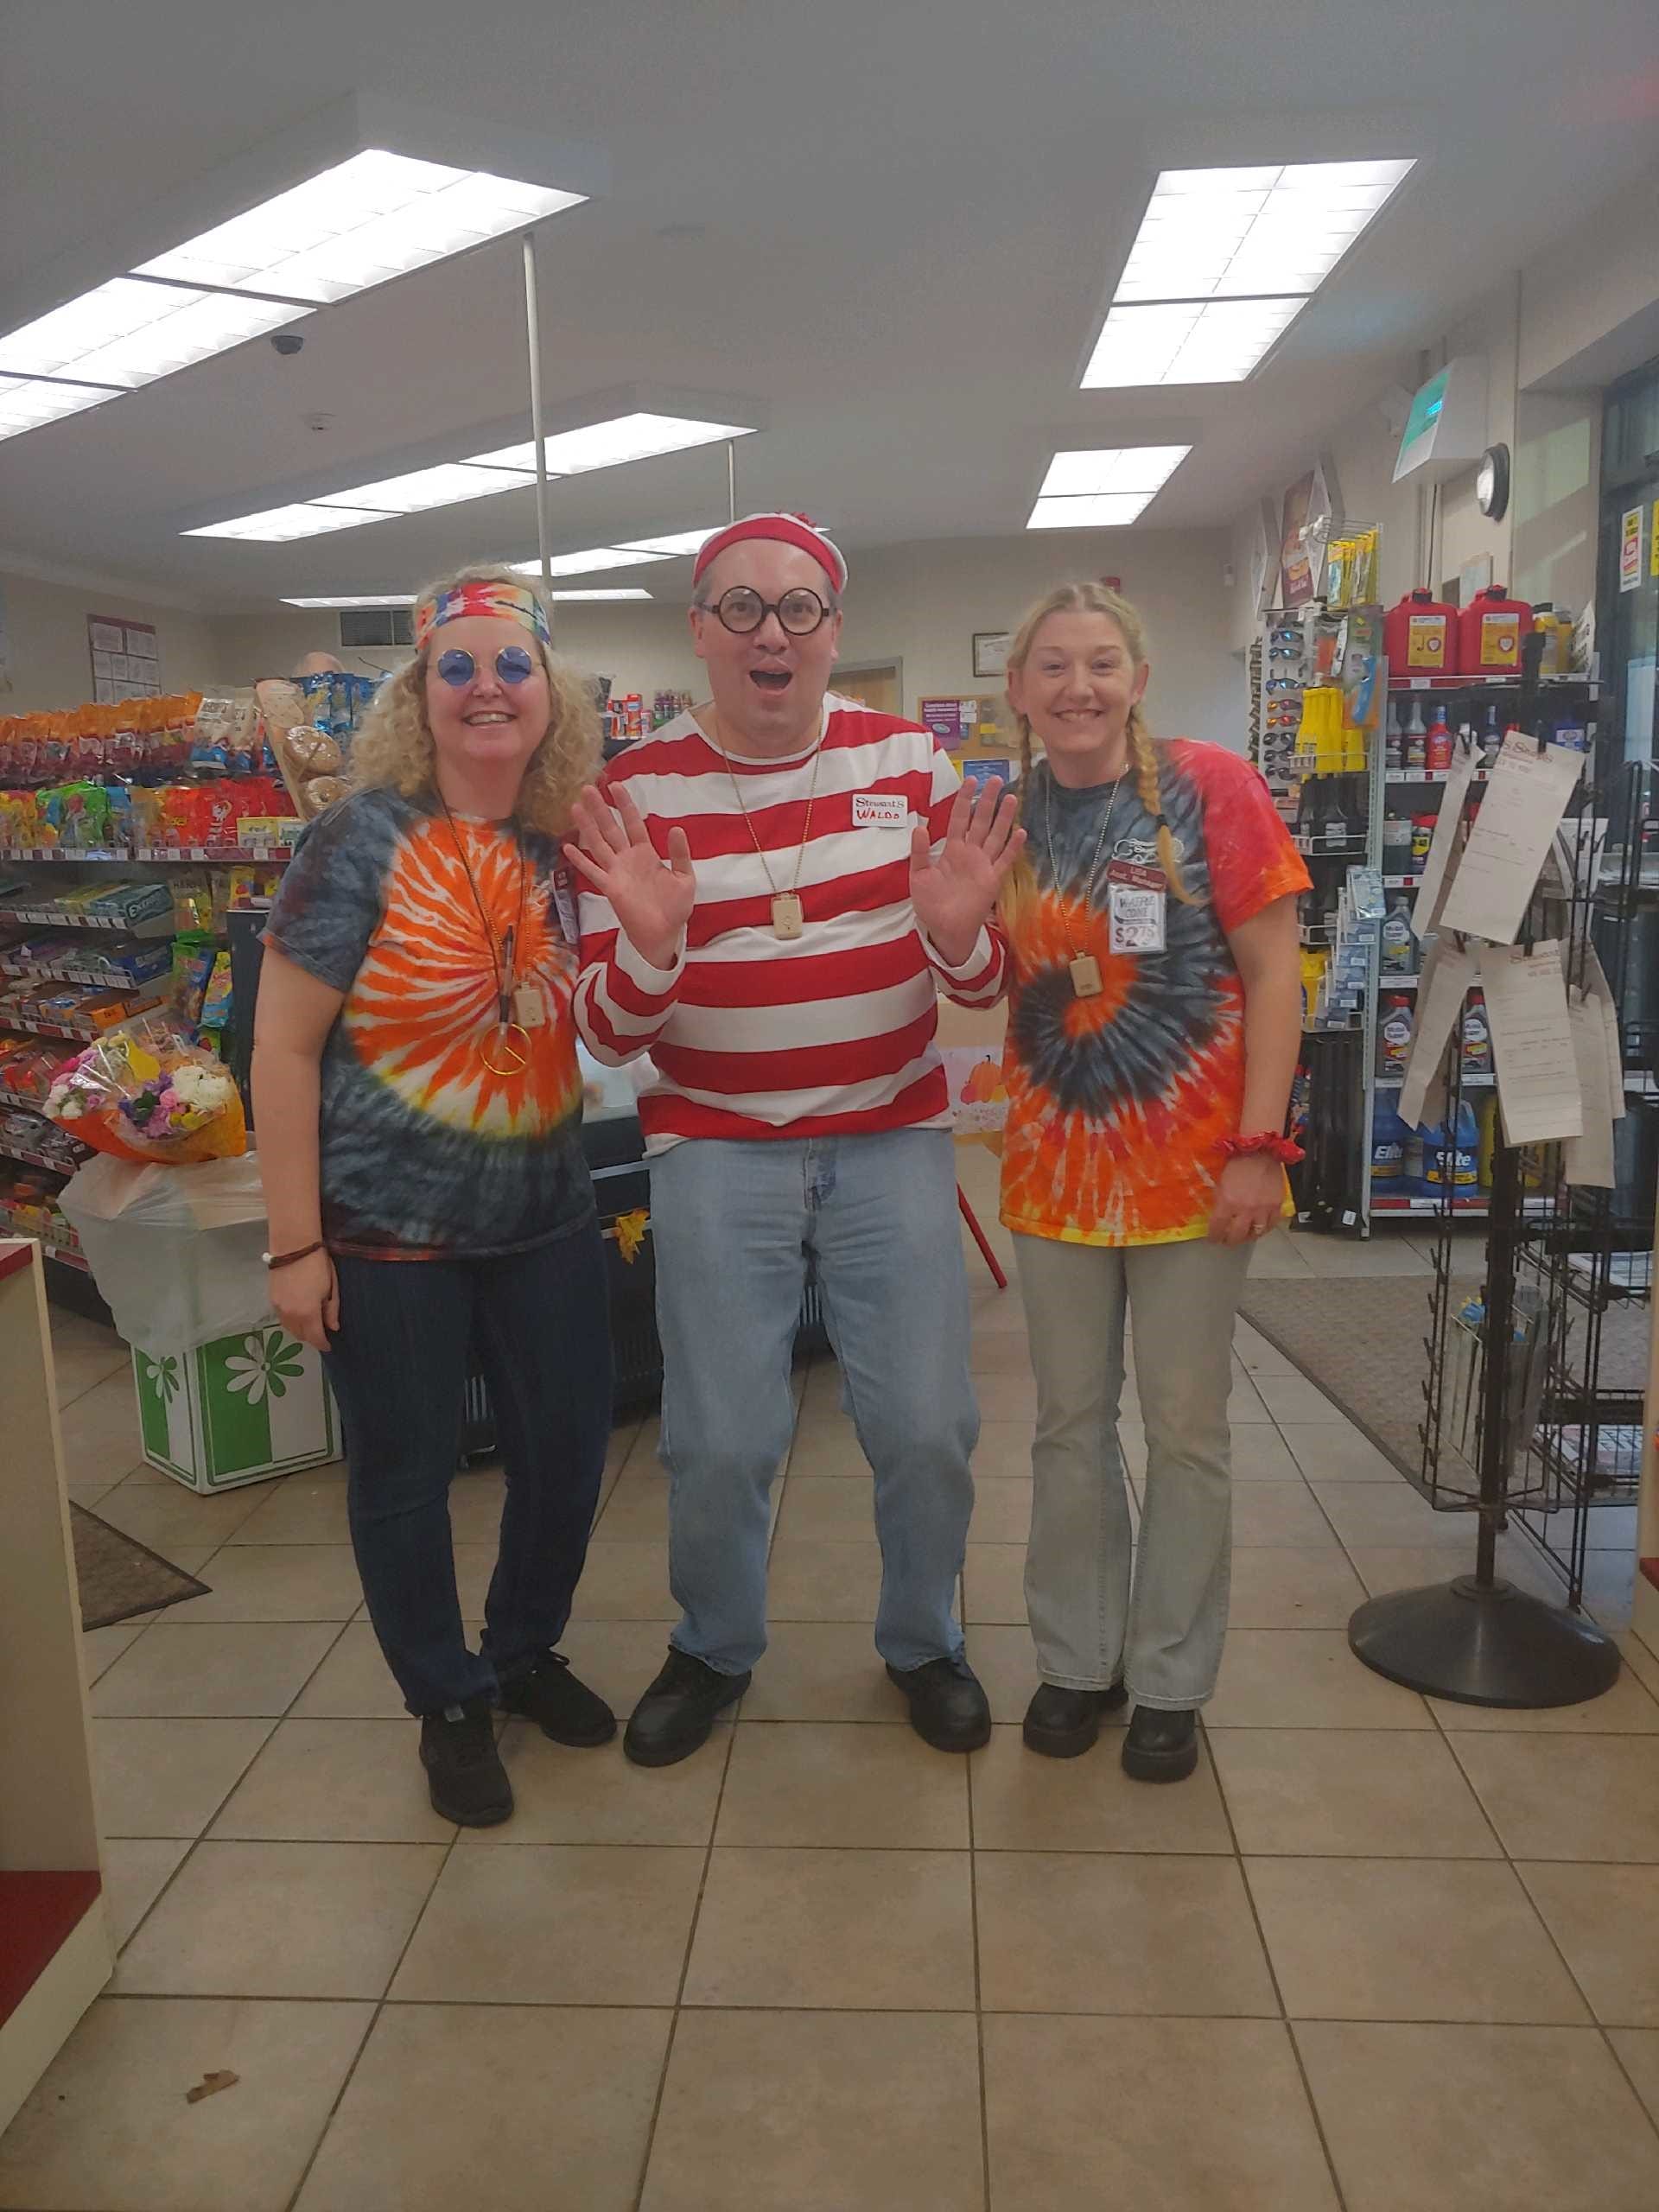 Partners dressed up at Stewart's Shops